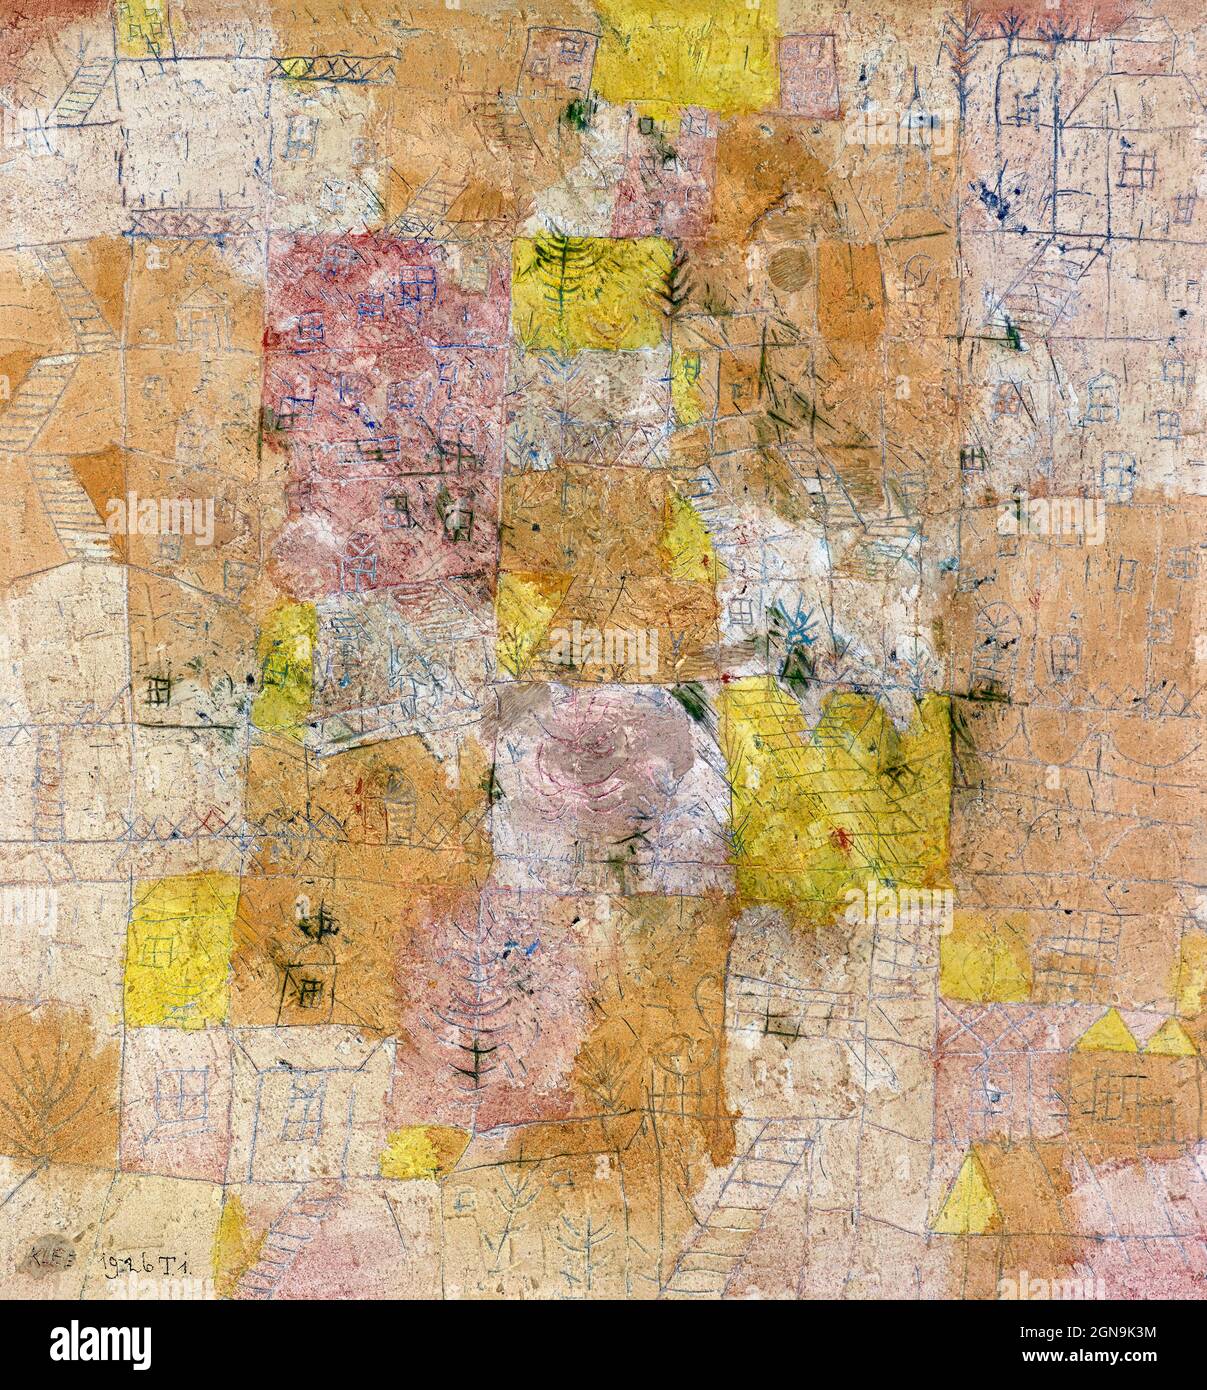 Suburban idyll (garden city idyll) (1926) painting in high resolution by Paul Klee. Stock Photo